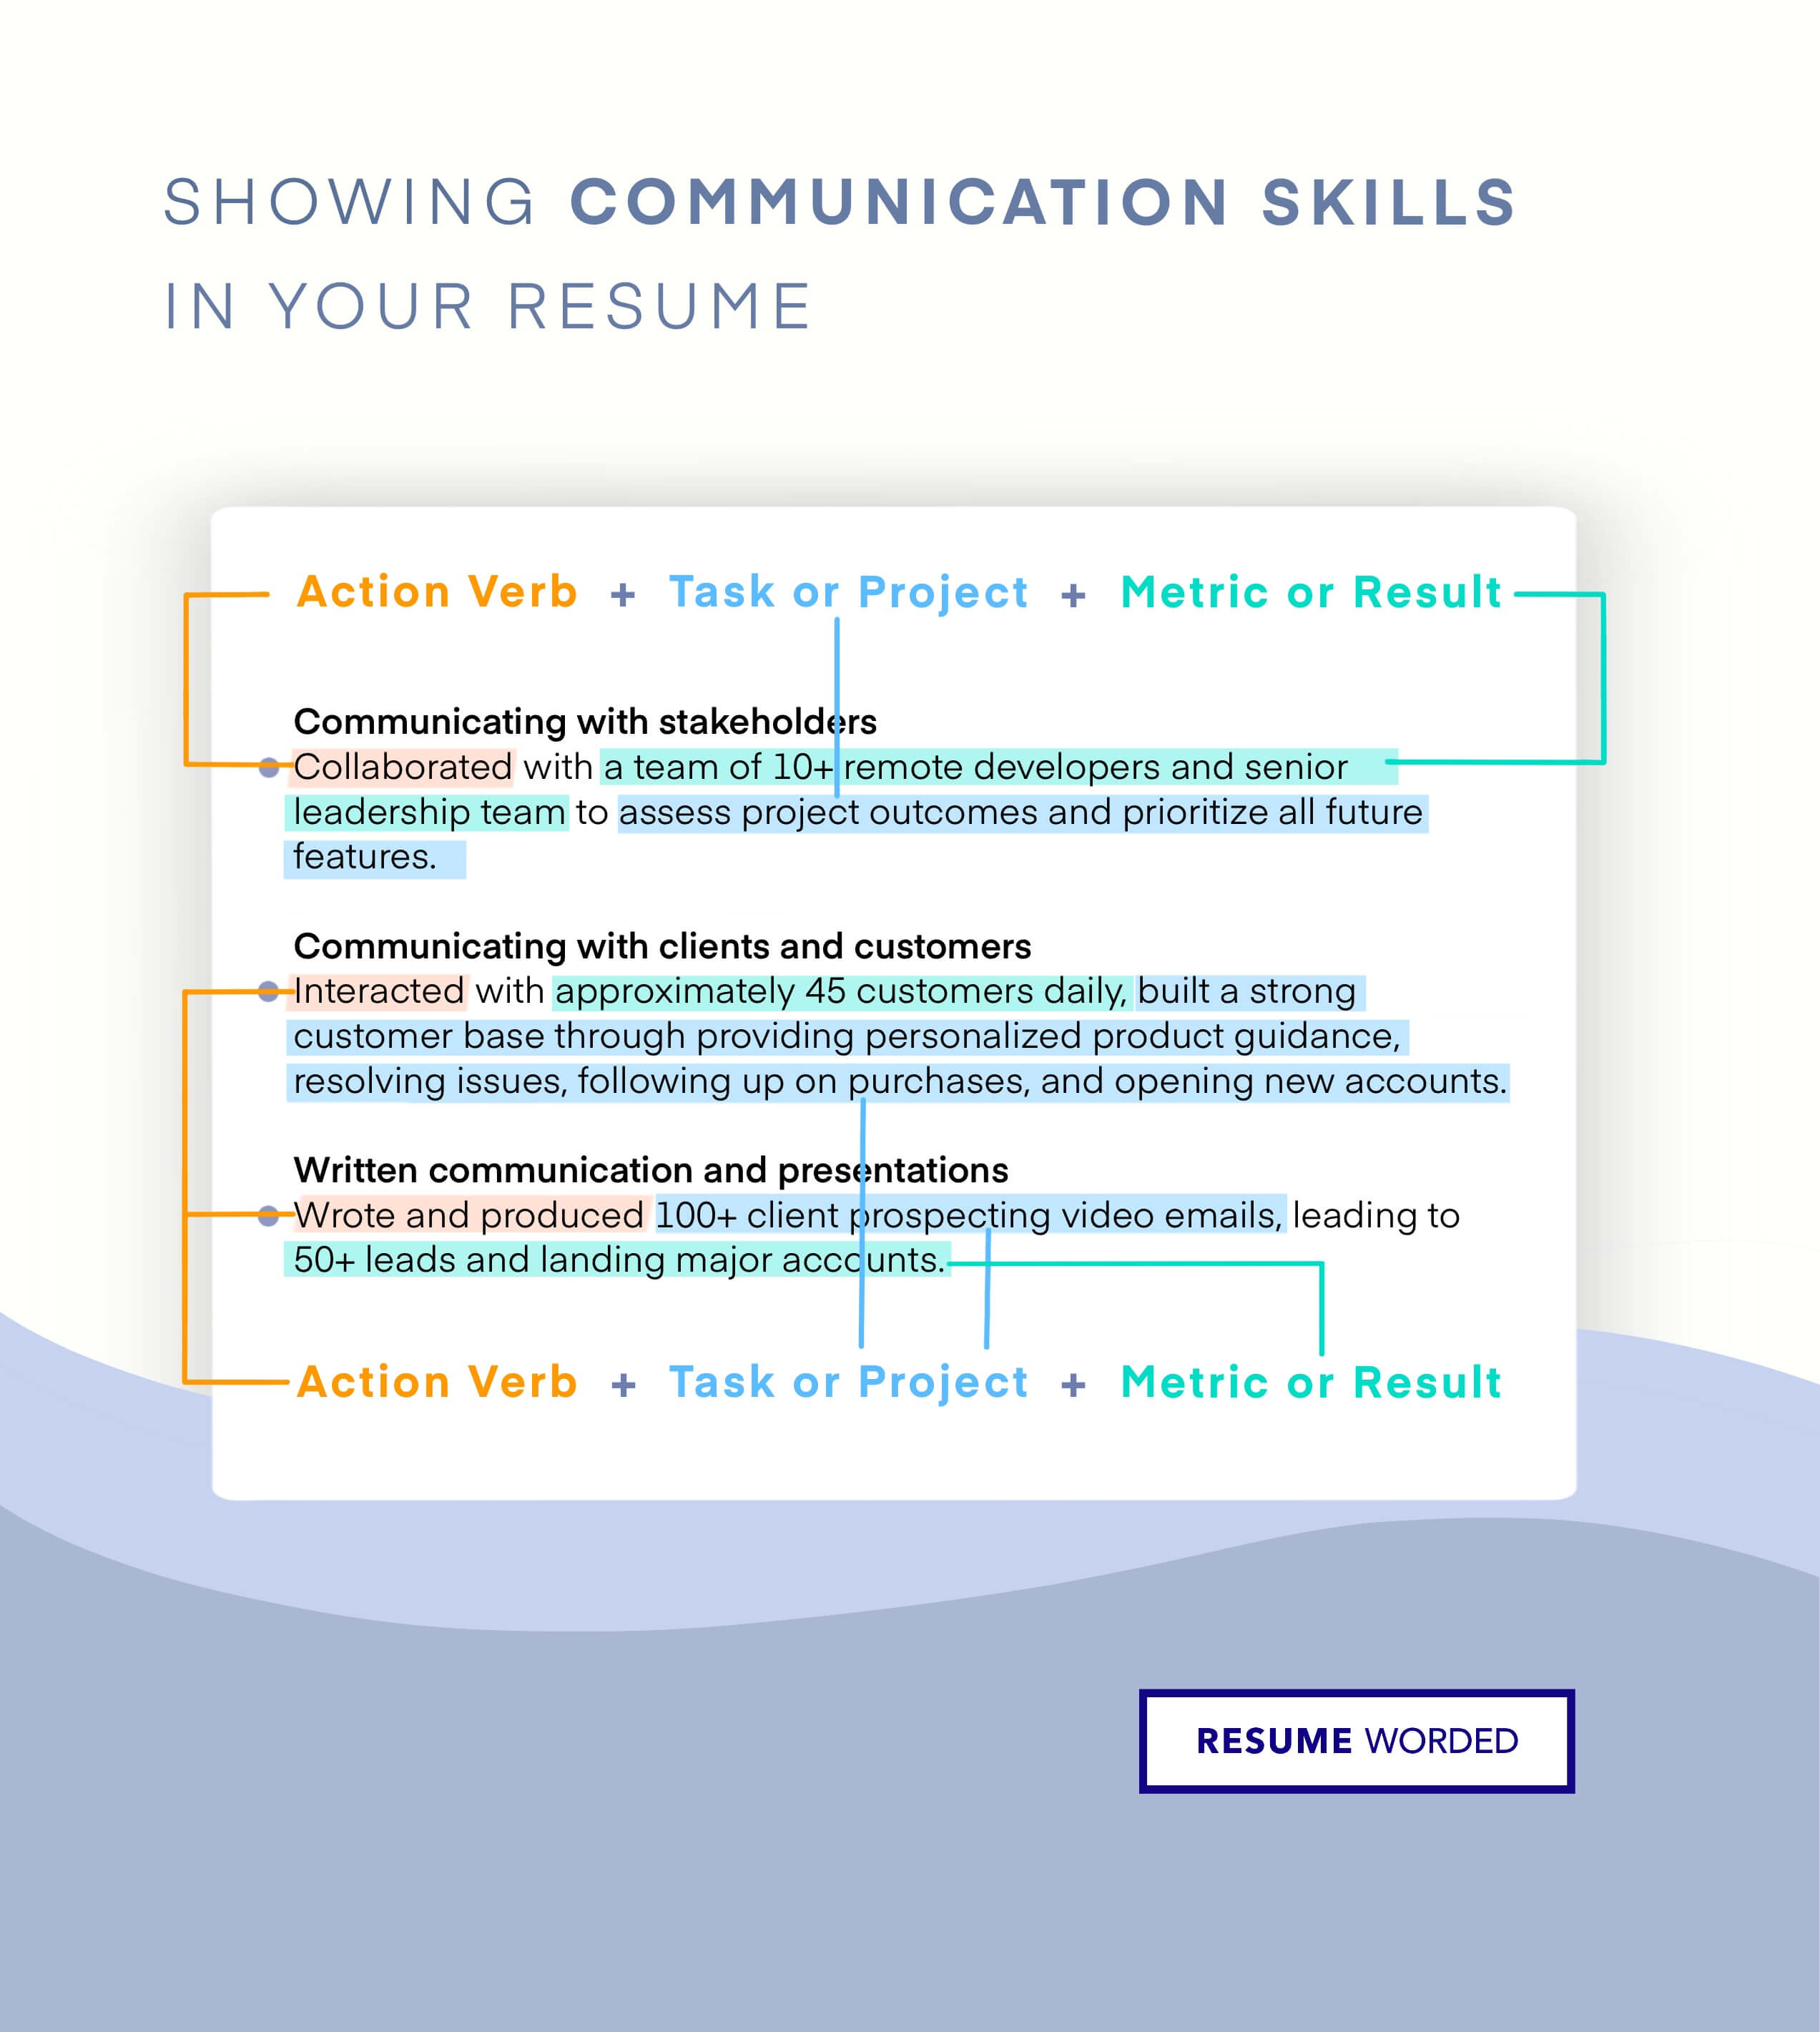 Showcase your communication skills - Technical Account Manager CV